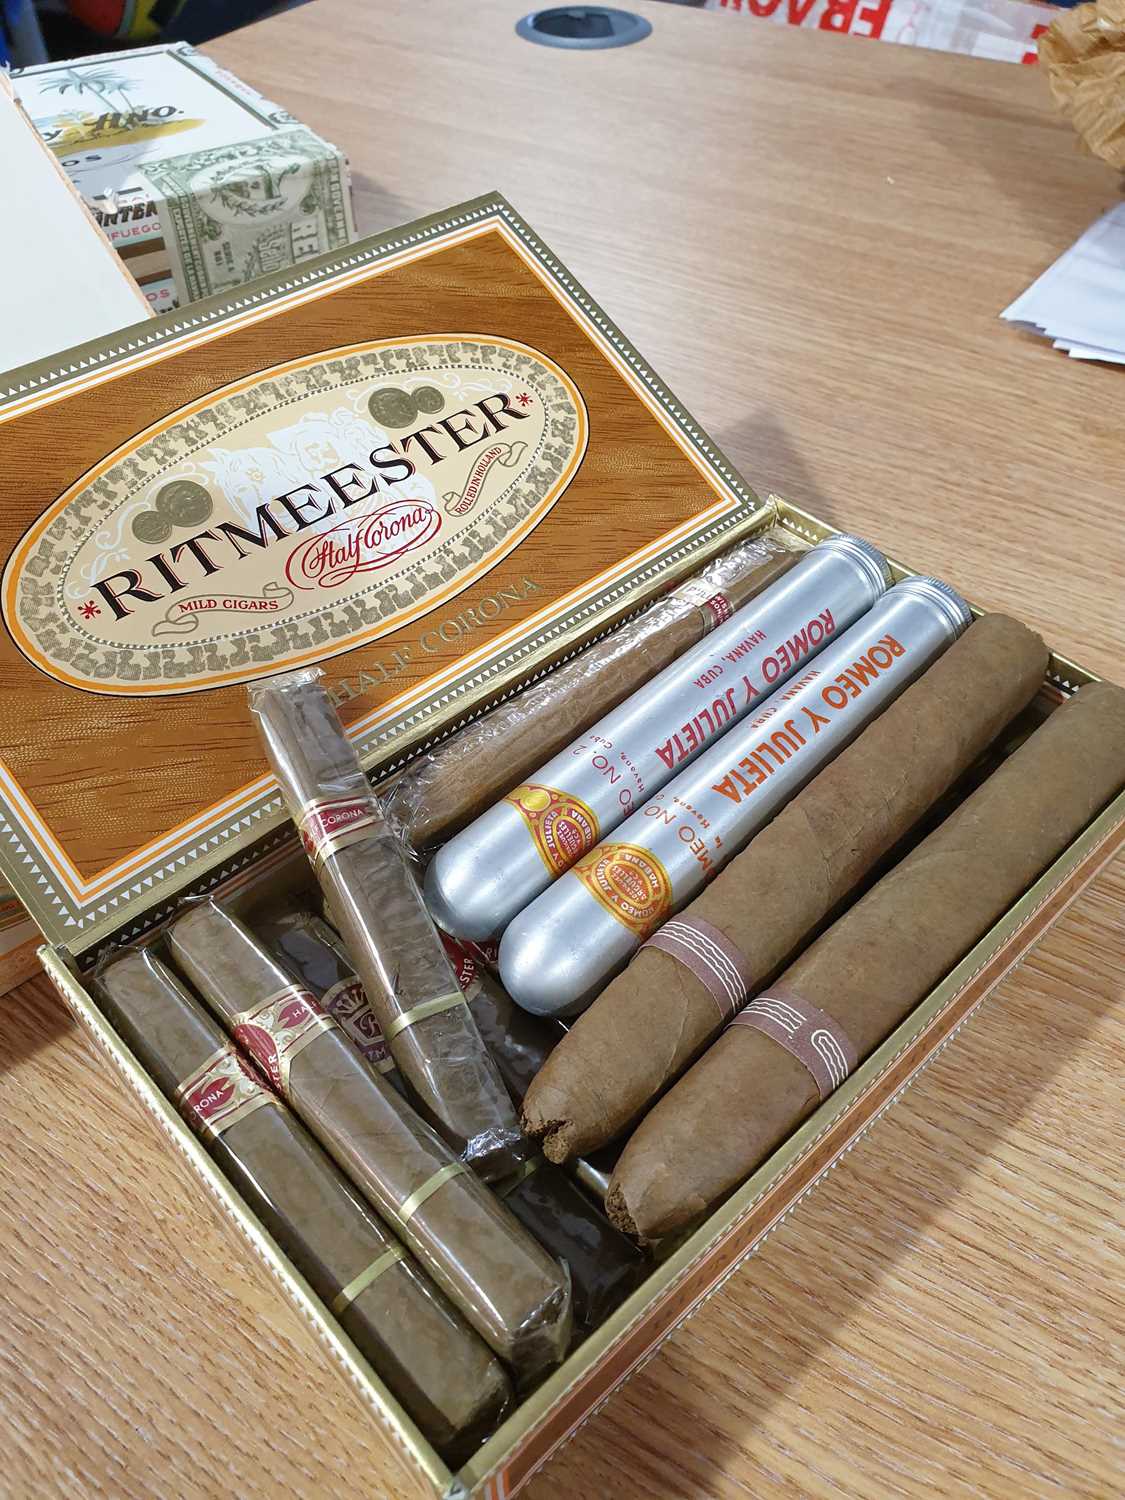 A collection of assorted cigars, including an unopened box of Quintero y Hno Cienfuegos cigars, - Image 18 of 20